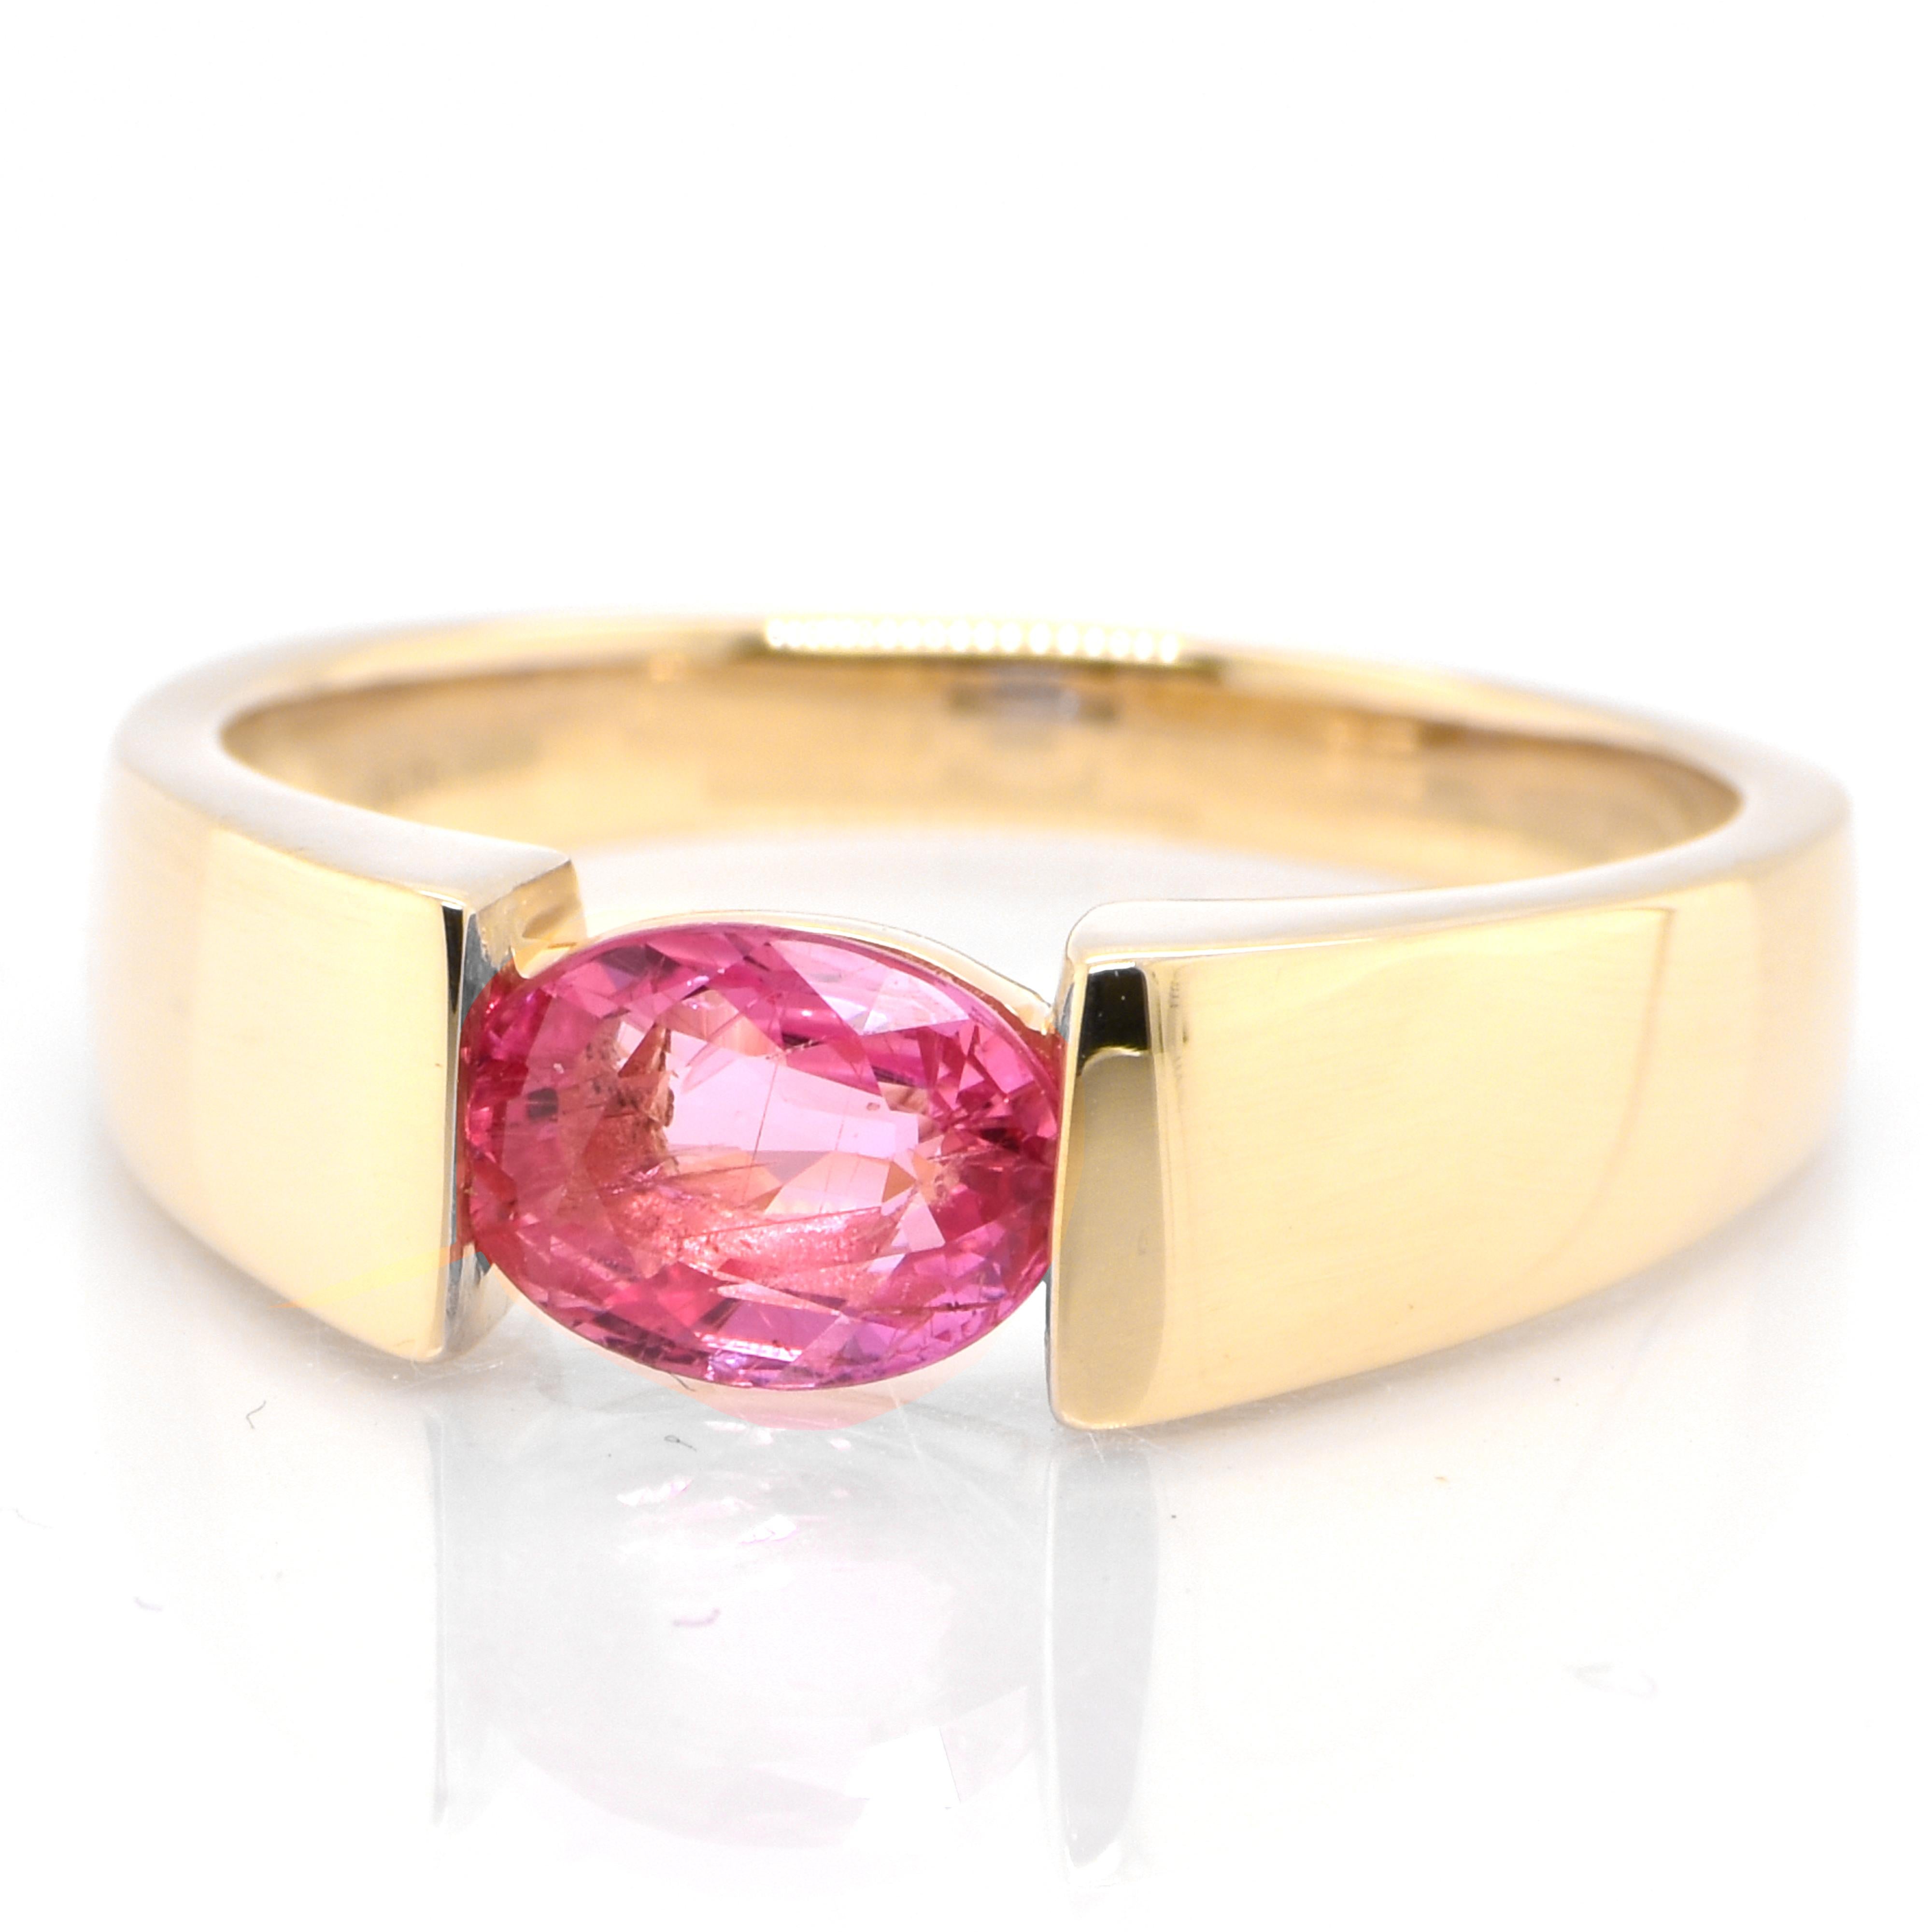 A beautiful ring featuring 0.99 Carat Natural Padparadscha Sapphire set in 18 Karat Yellow Gold. Sapphires have extraordinary durability - they excel in hardness as well as toughness and durability making them very popular in jewelry. Traditionally,